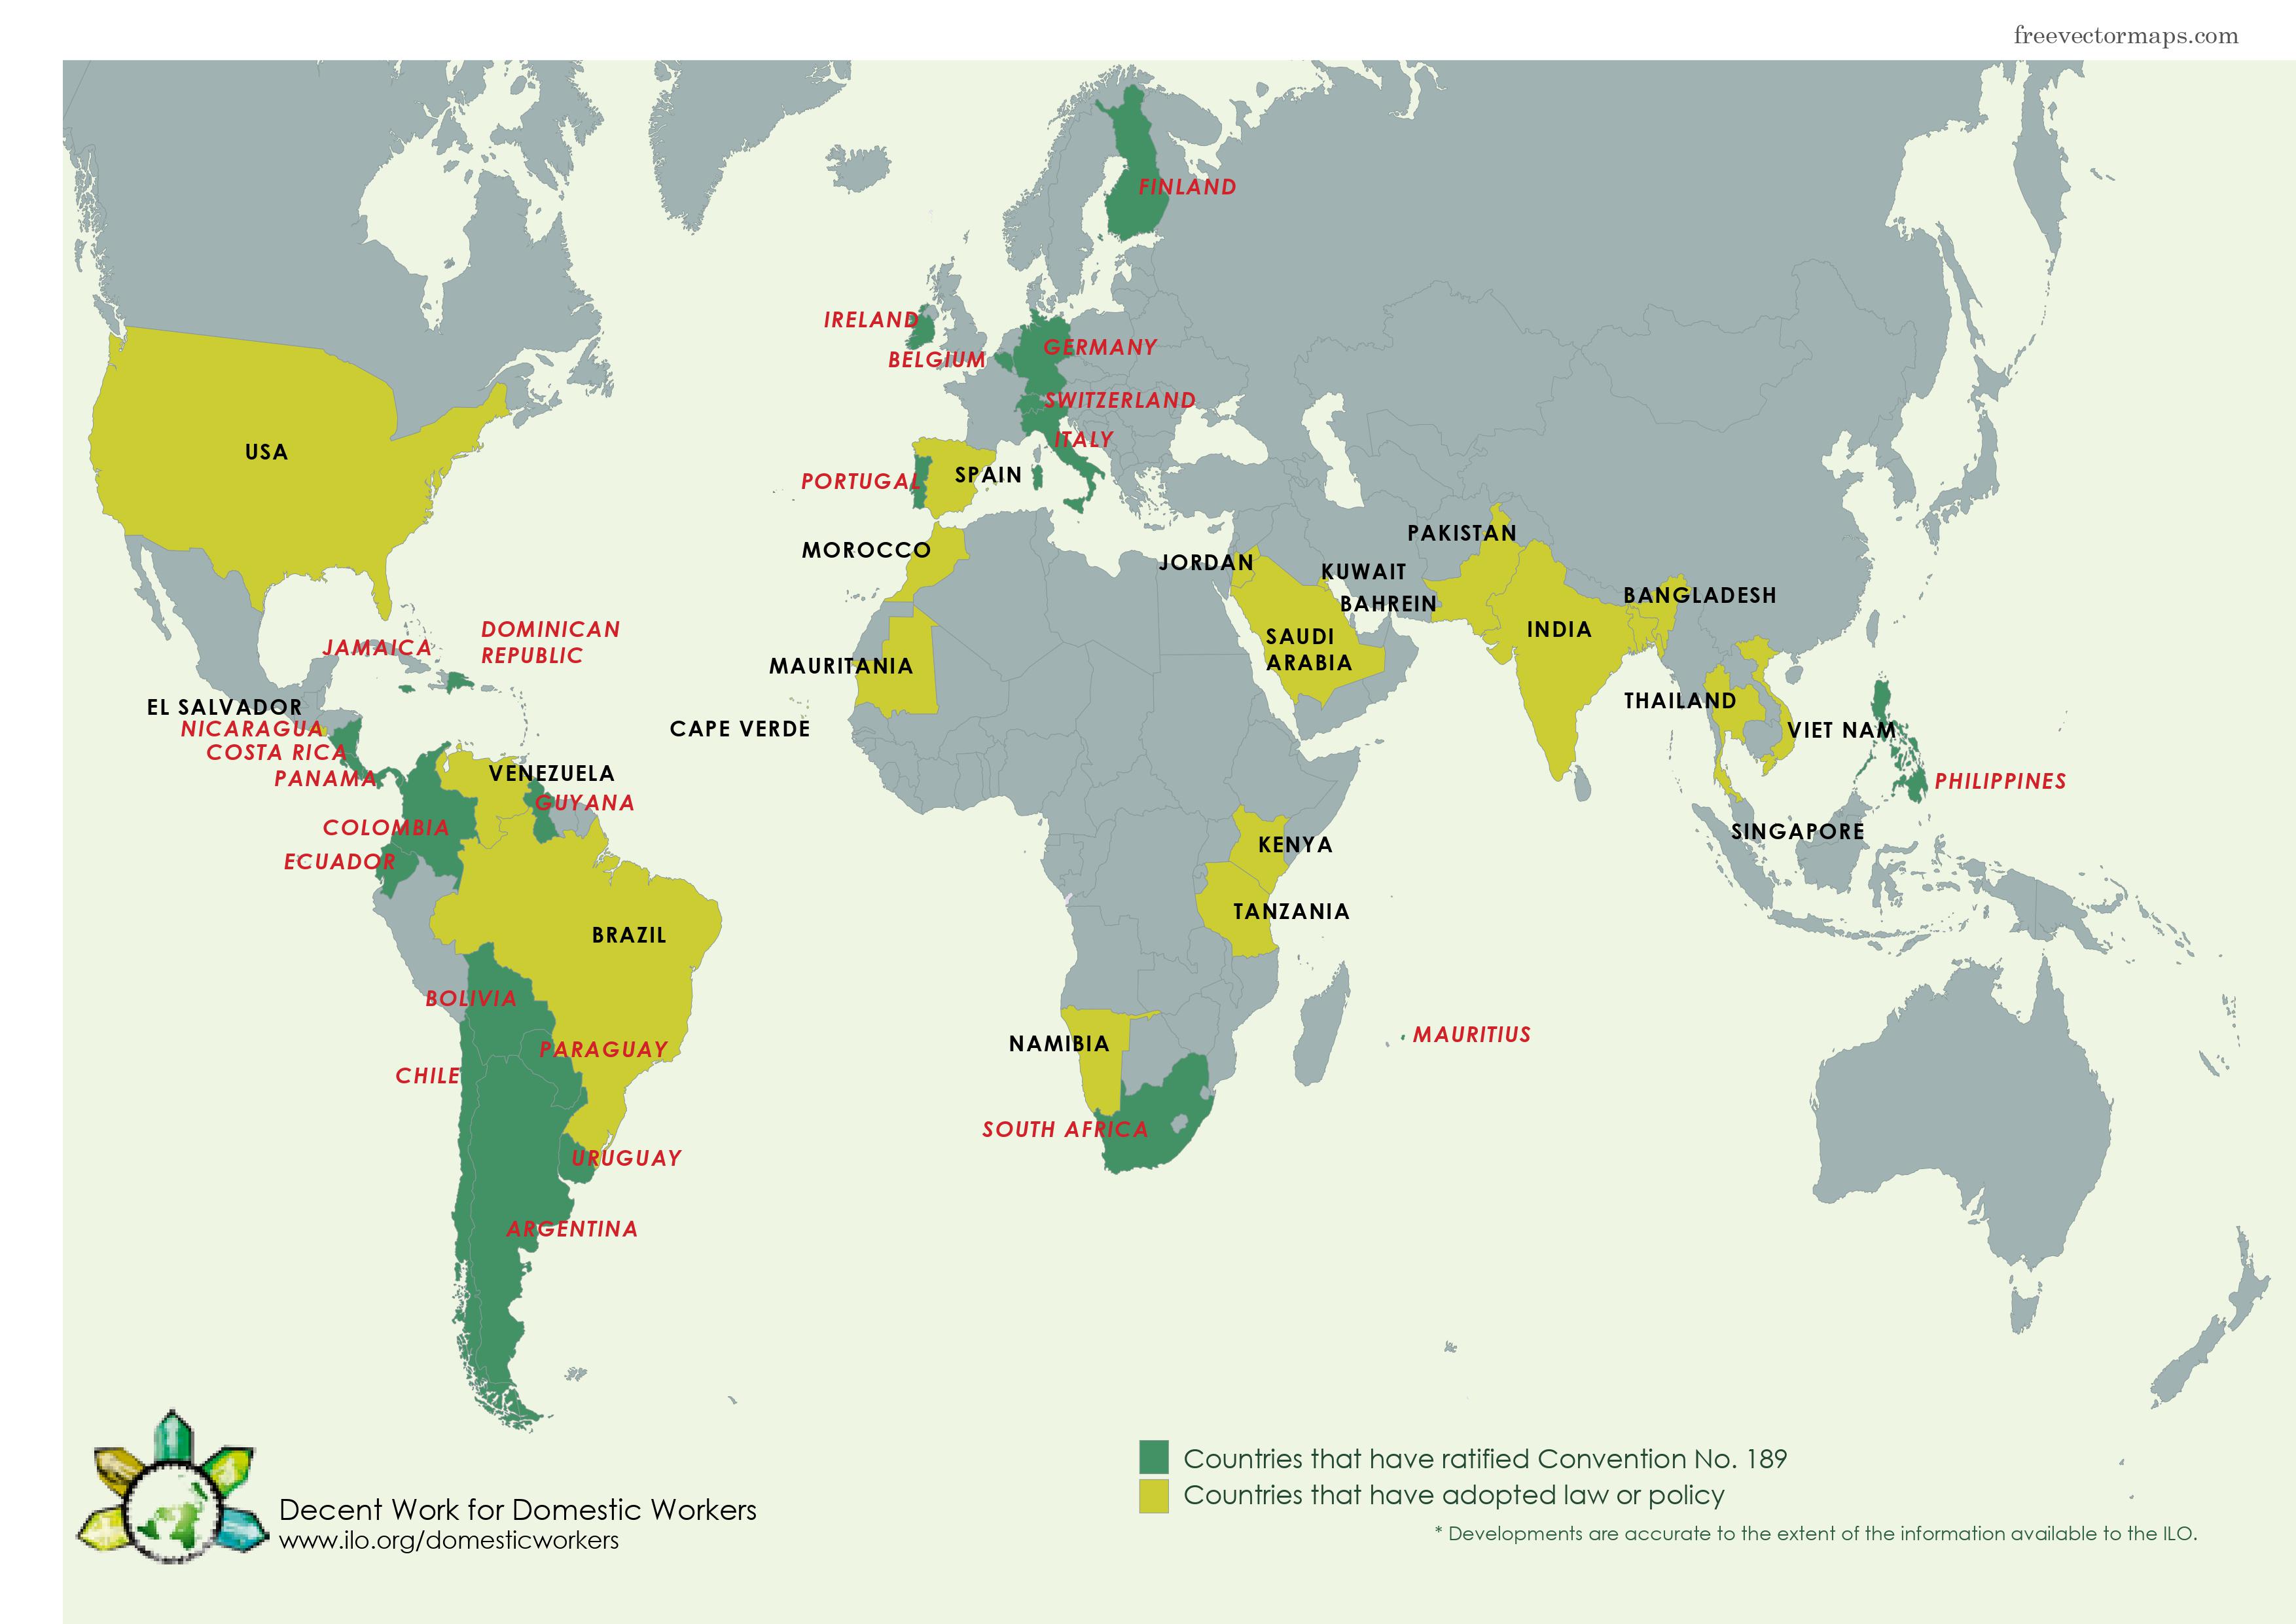 A map of the countries who have ratified ILO convention 189 and those who have turned it into policy